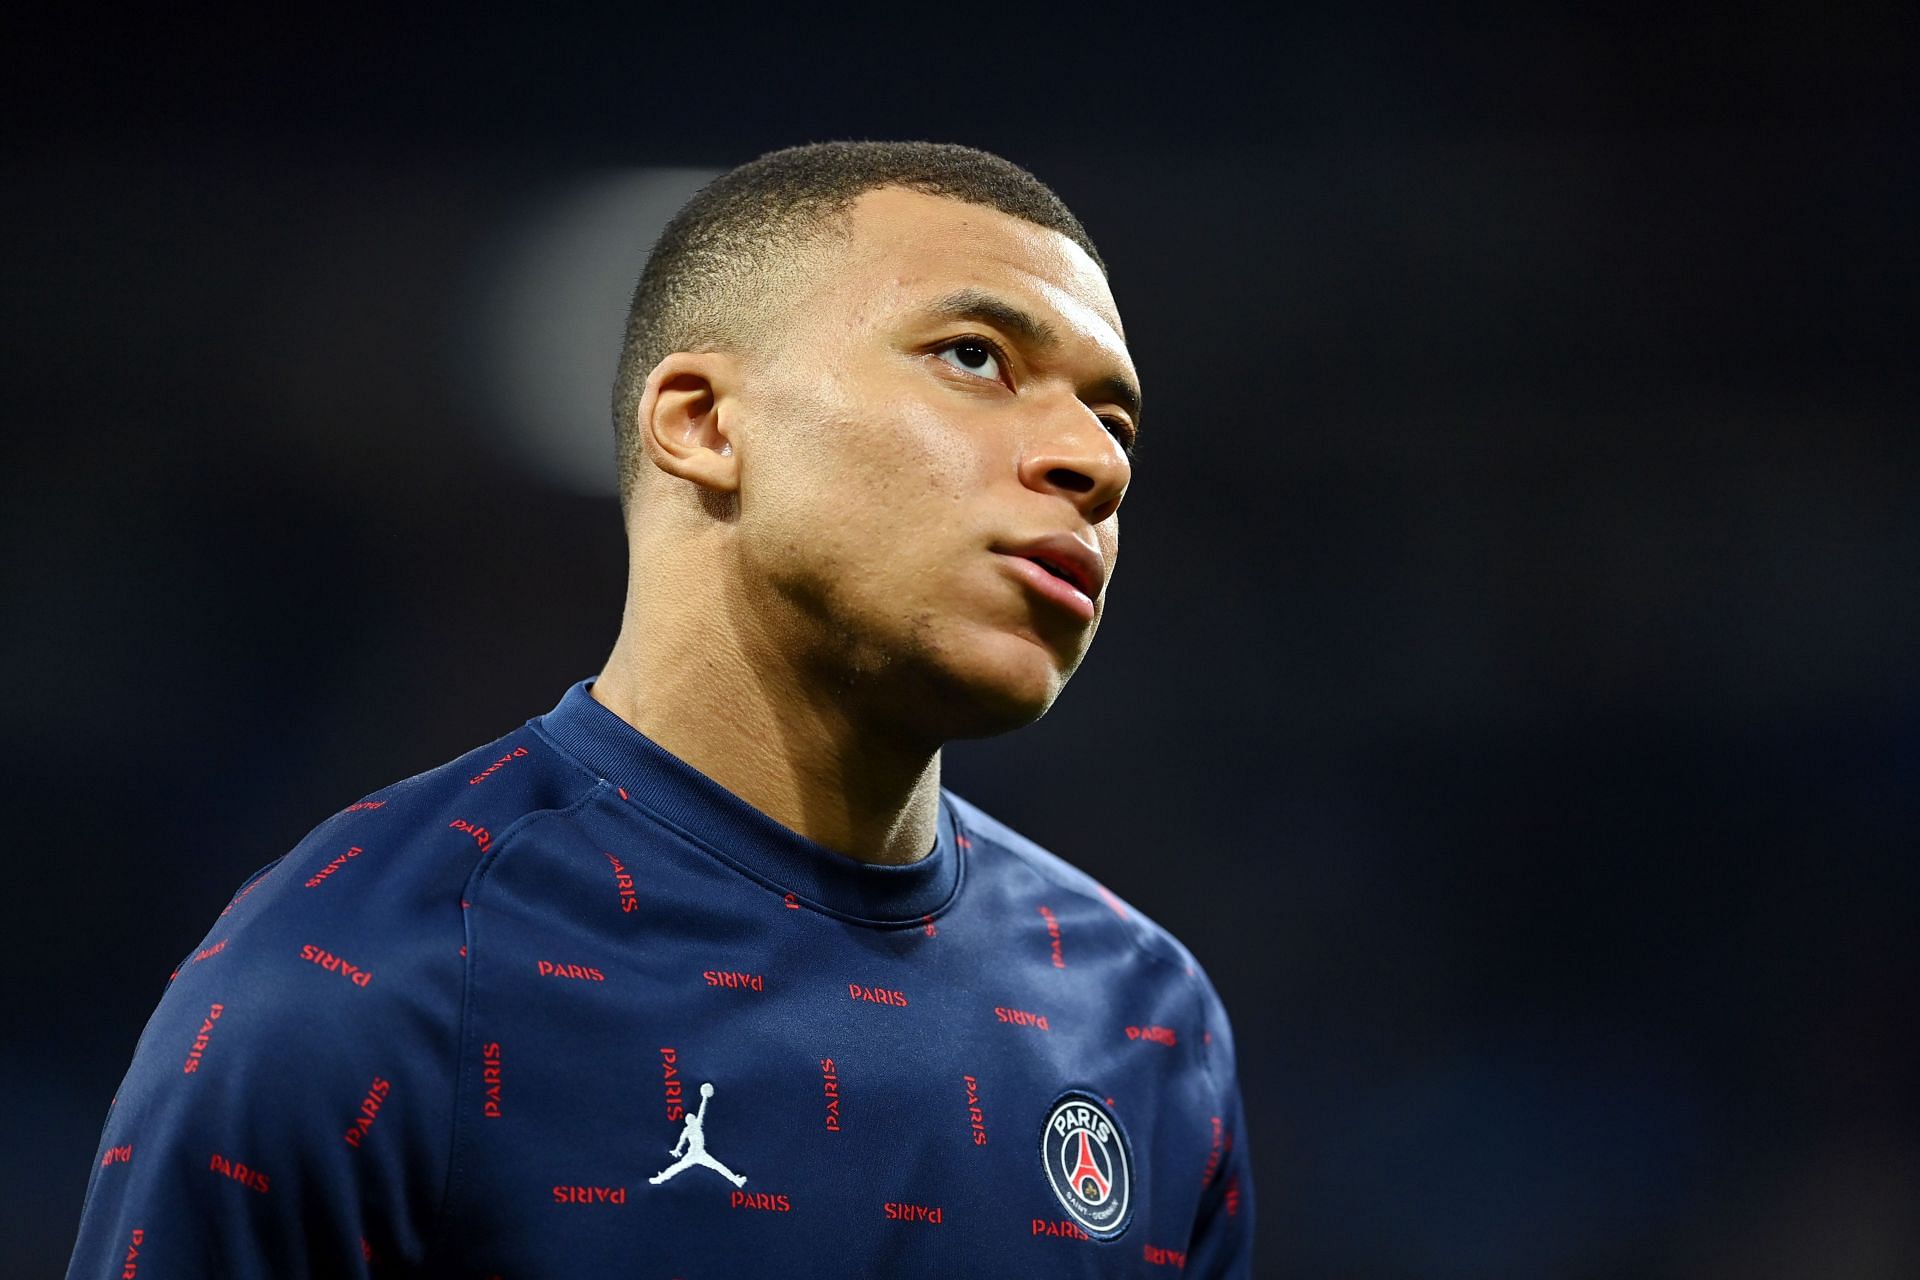 The Parisians forward wants to join Los Blancos in 2024.